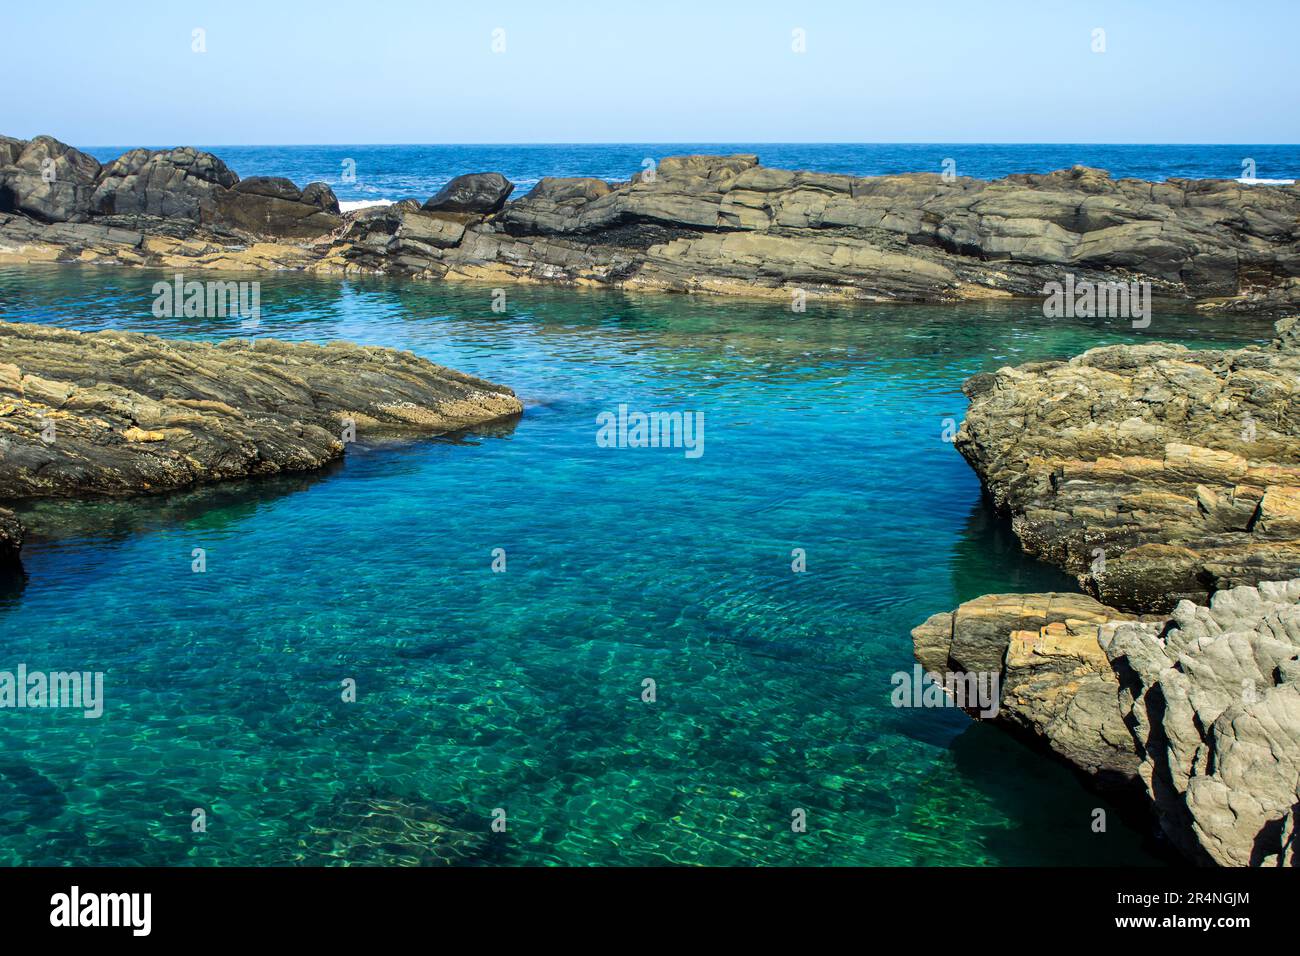 A deep clear rock pool, protected from the ocean by a sharp rocky reef, along the Tsitsikamma Coast of South Africa Stock Photo